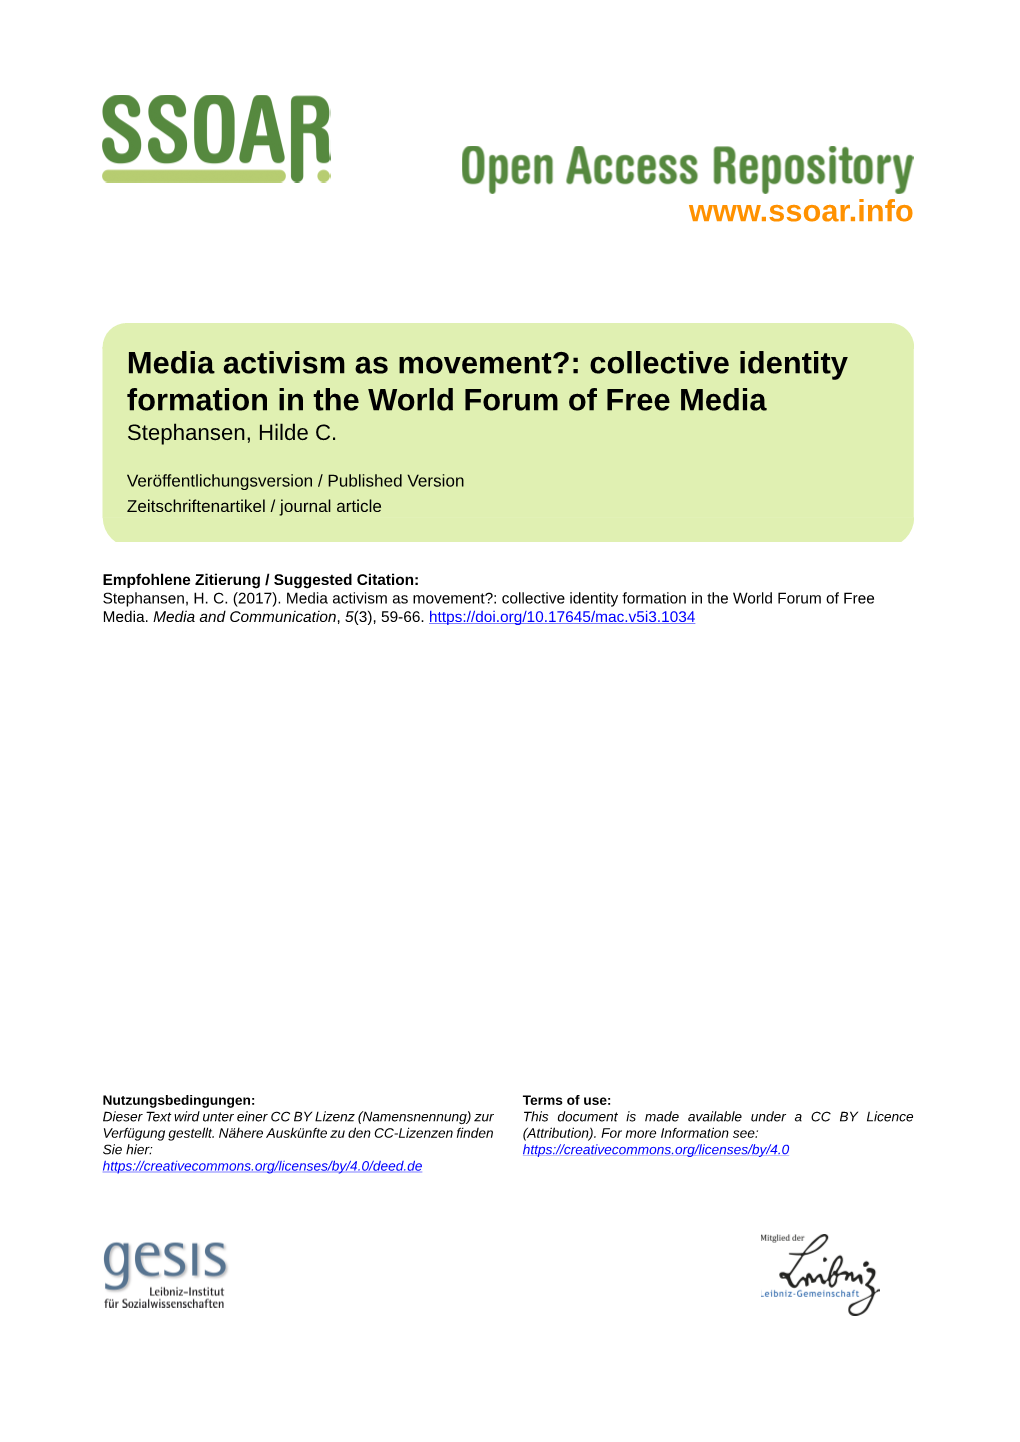 Media Activism As Movement? Collective Identity Formation in the World Forum of Free Media